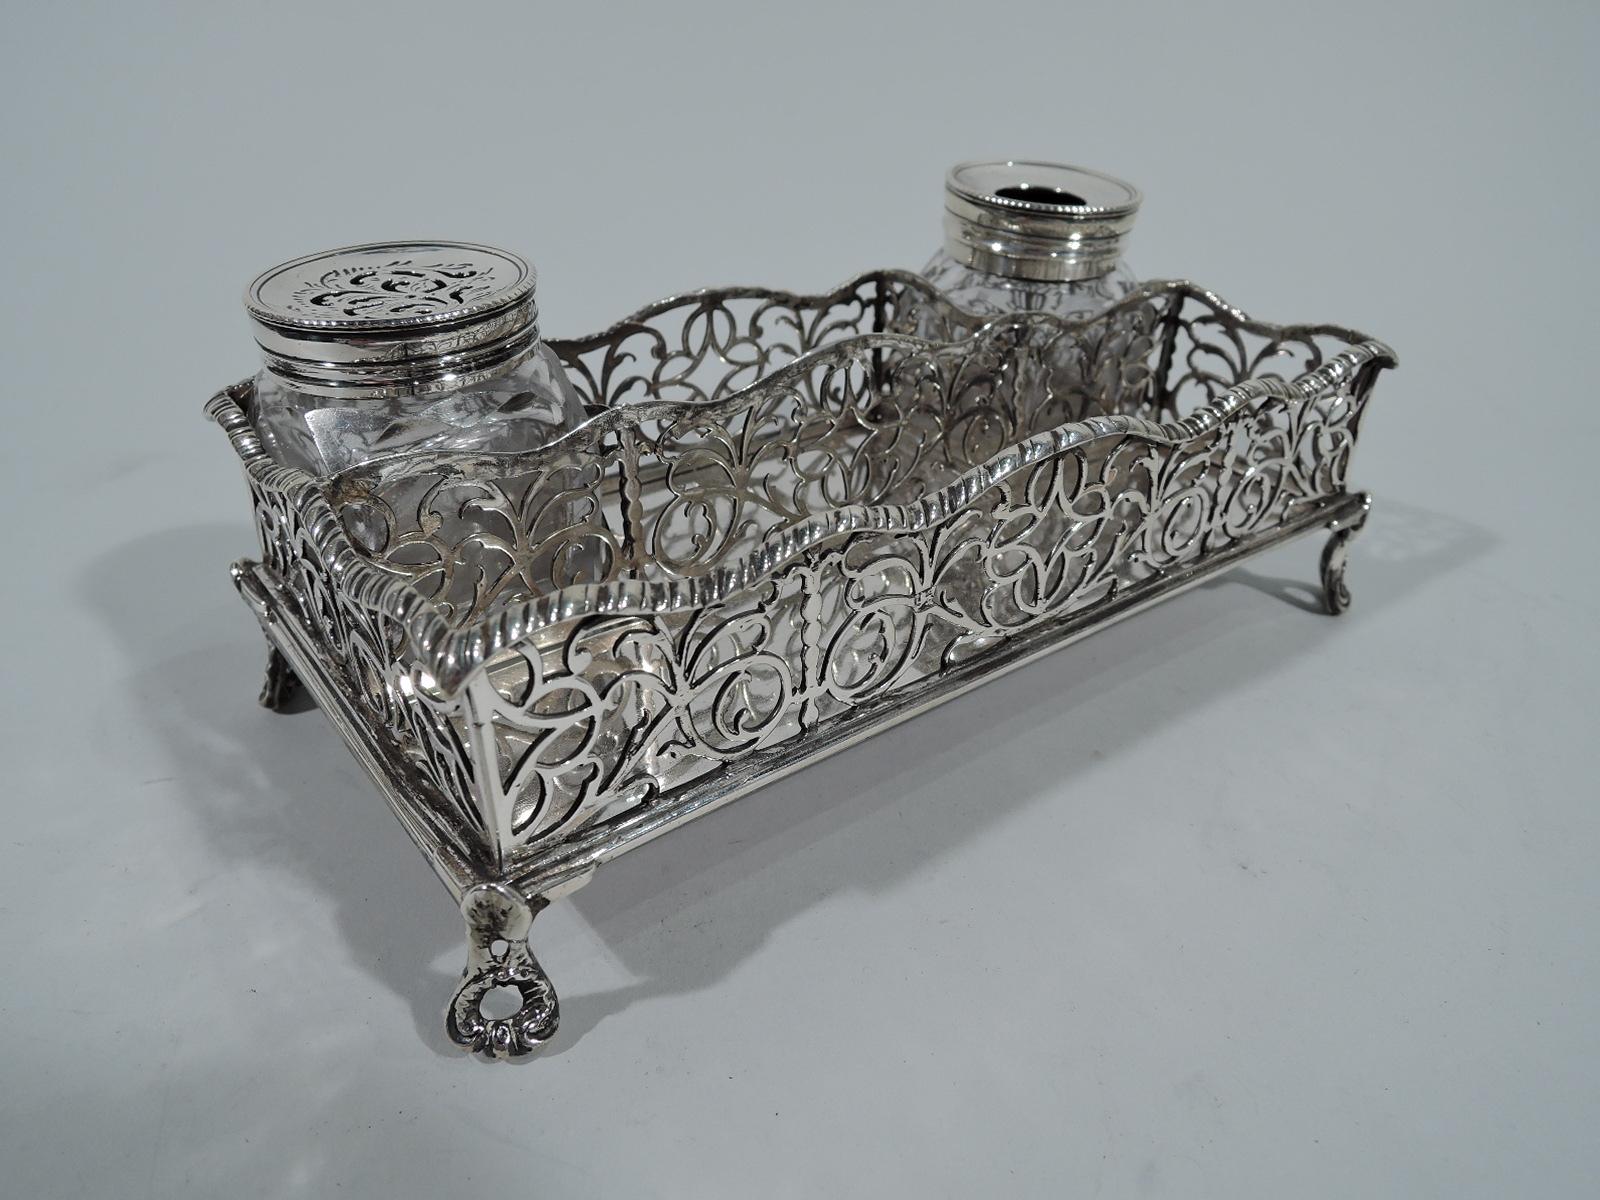 Mid-18th Century Antique English Georgian Sterling Silver Inkstand by William Plummer